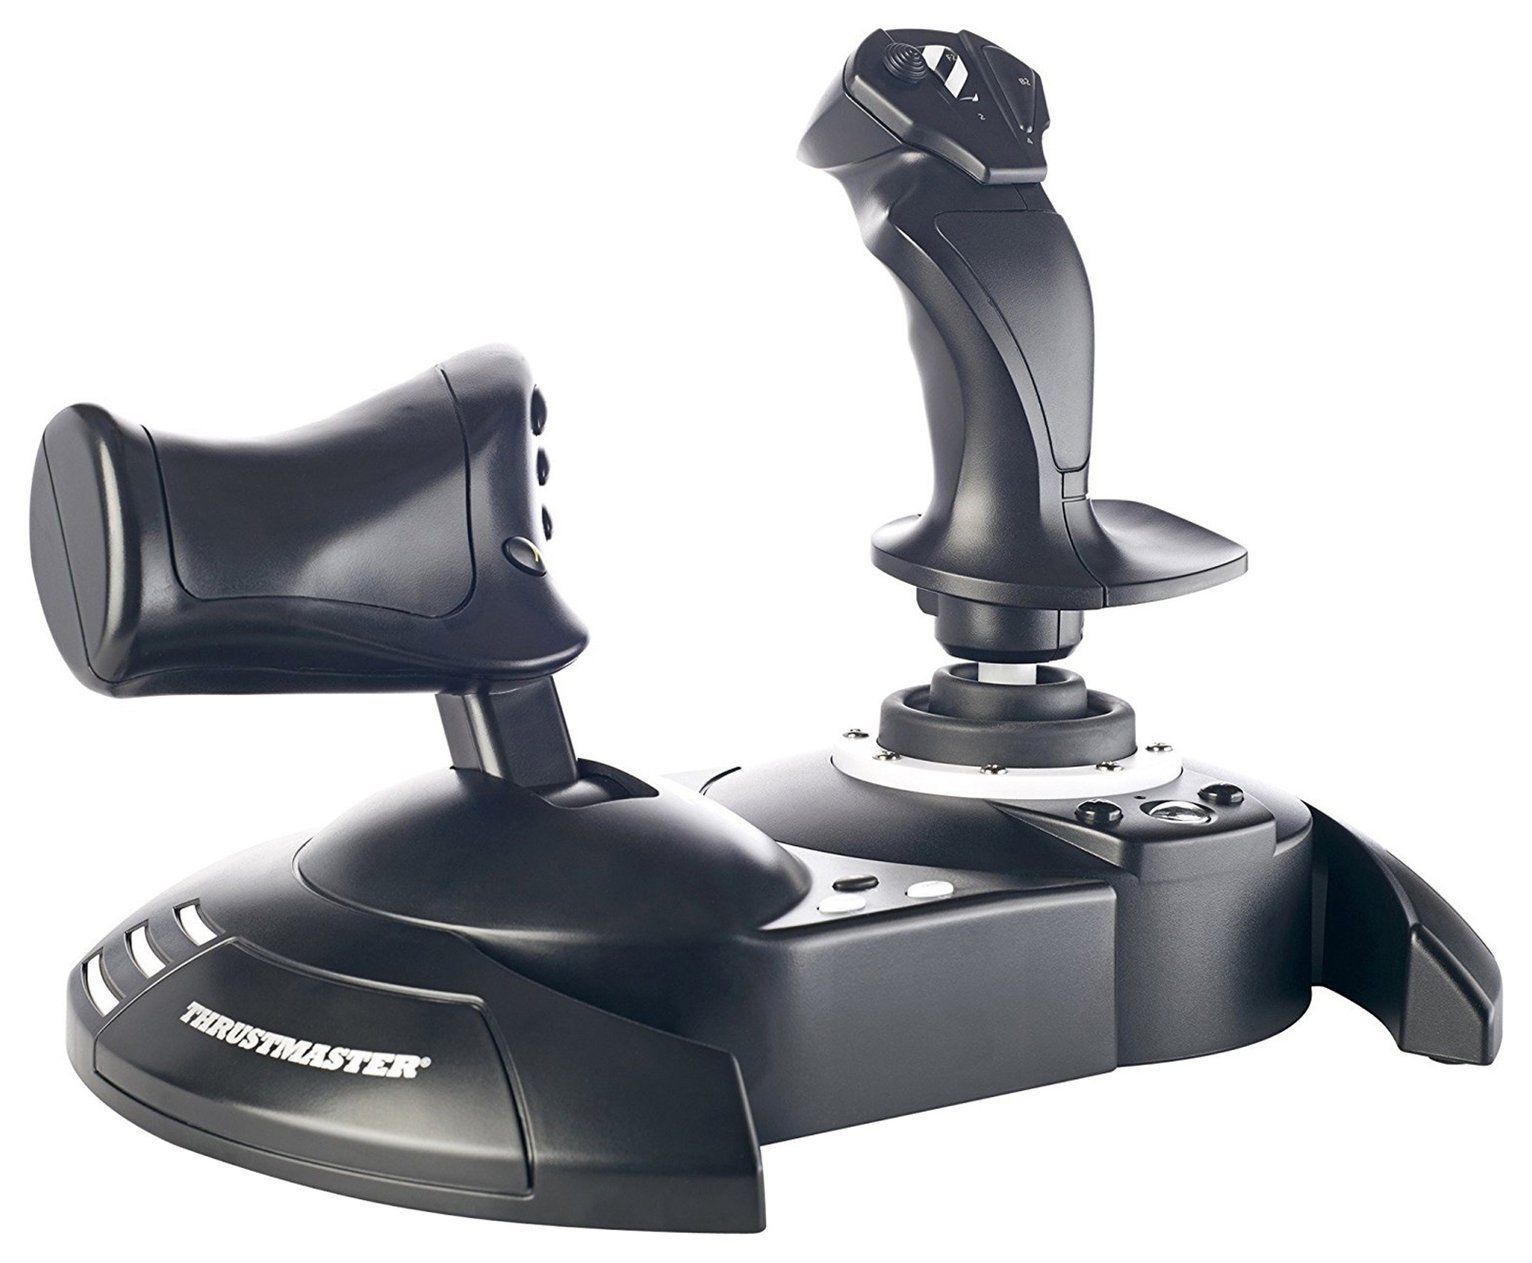 Thrustmaster T Flight Hotas One Joystick for Xbox One and PC